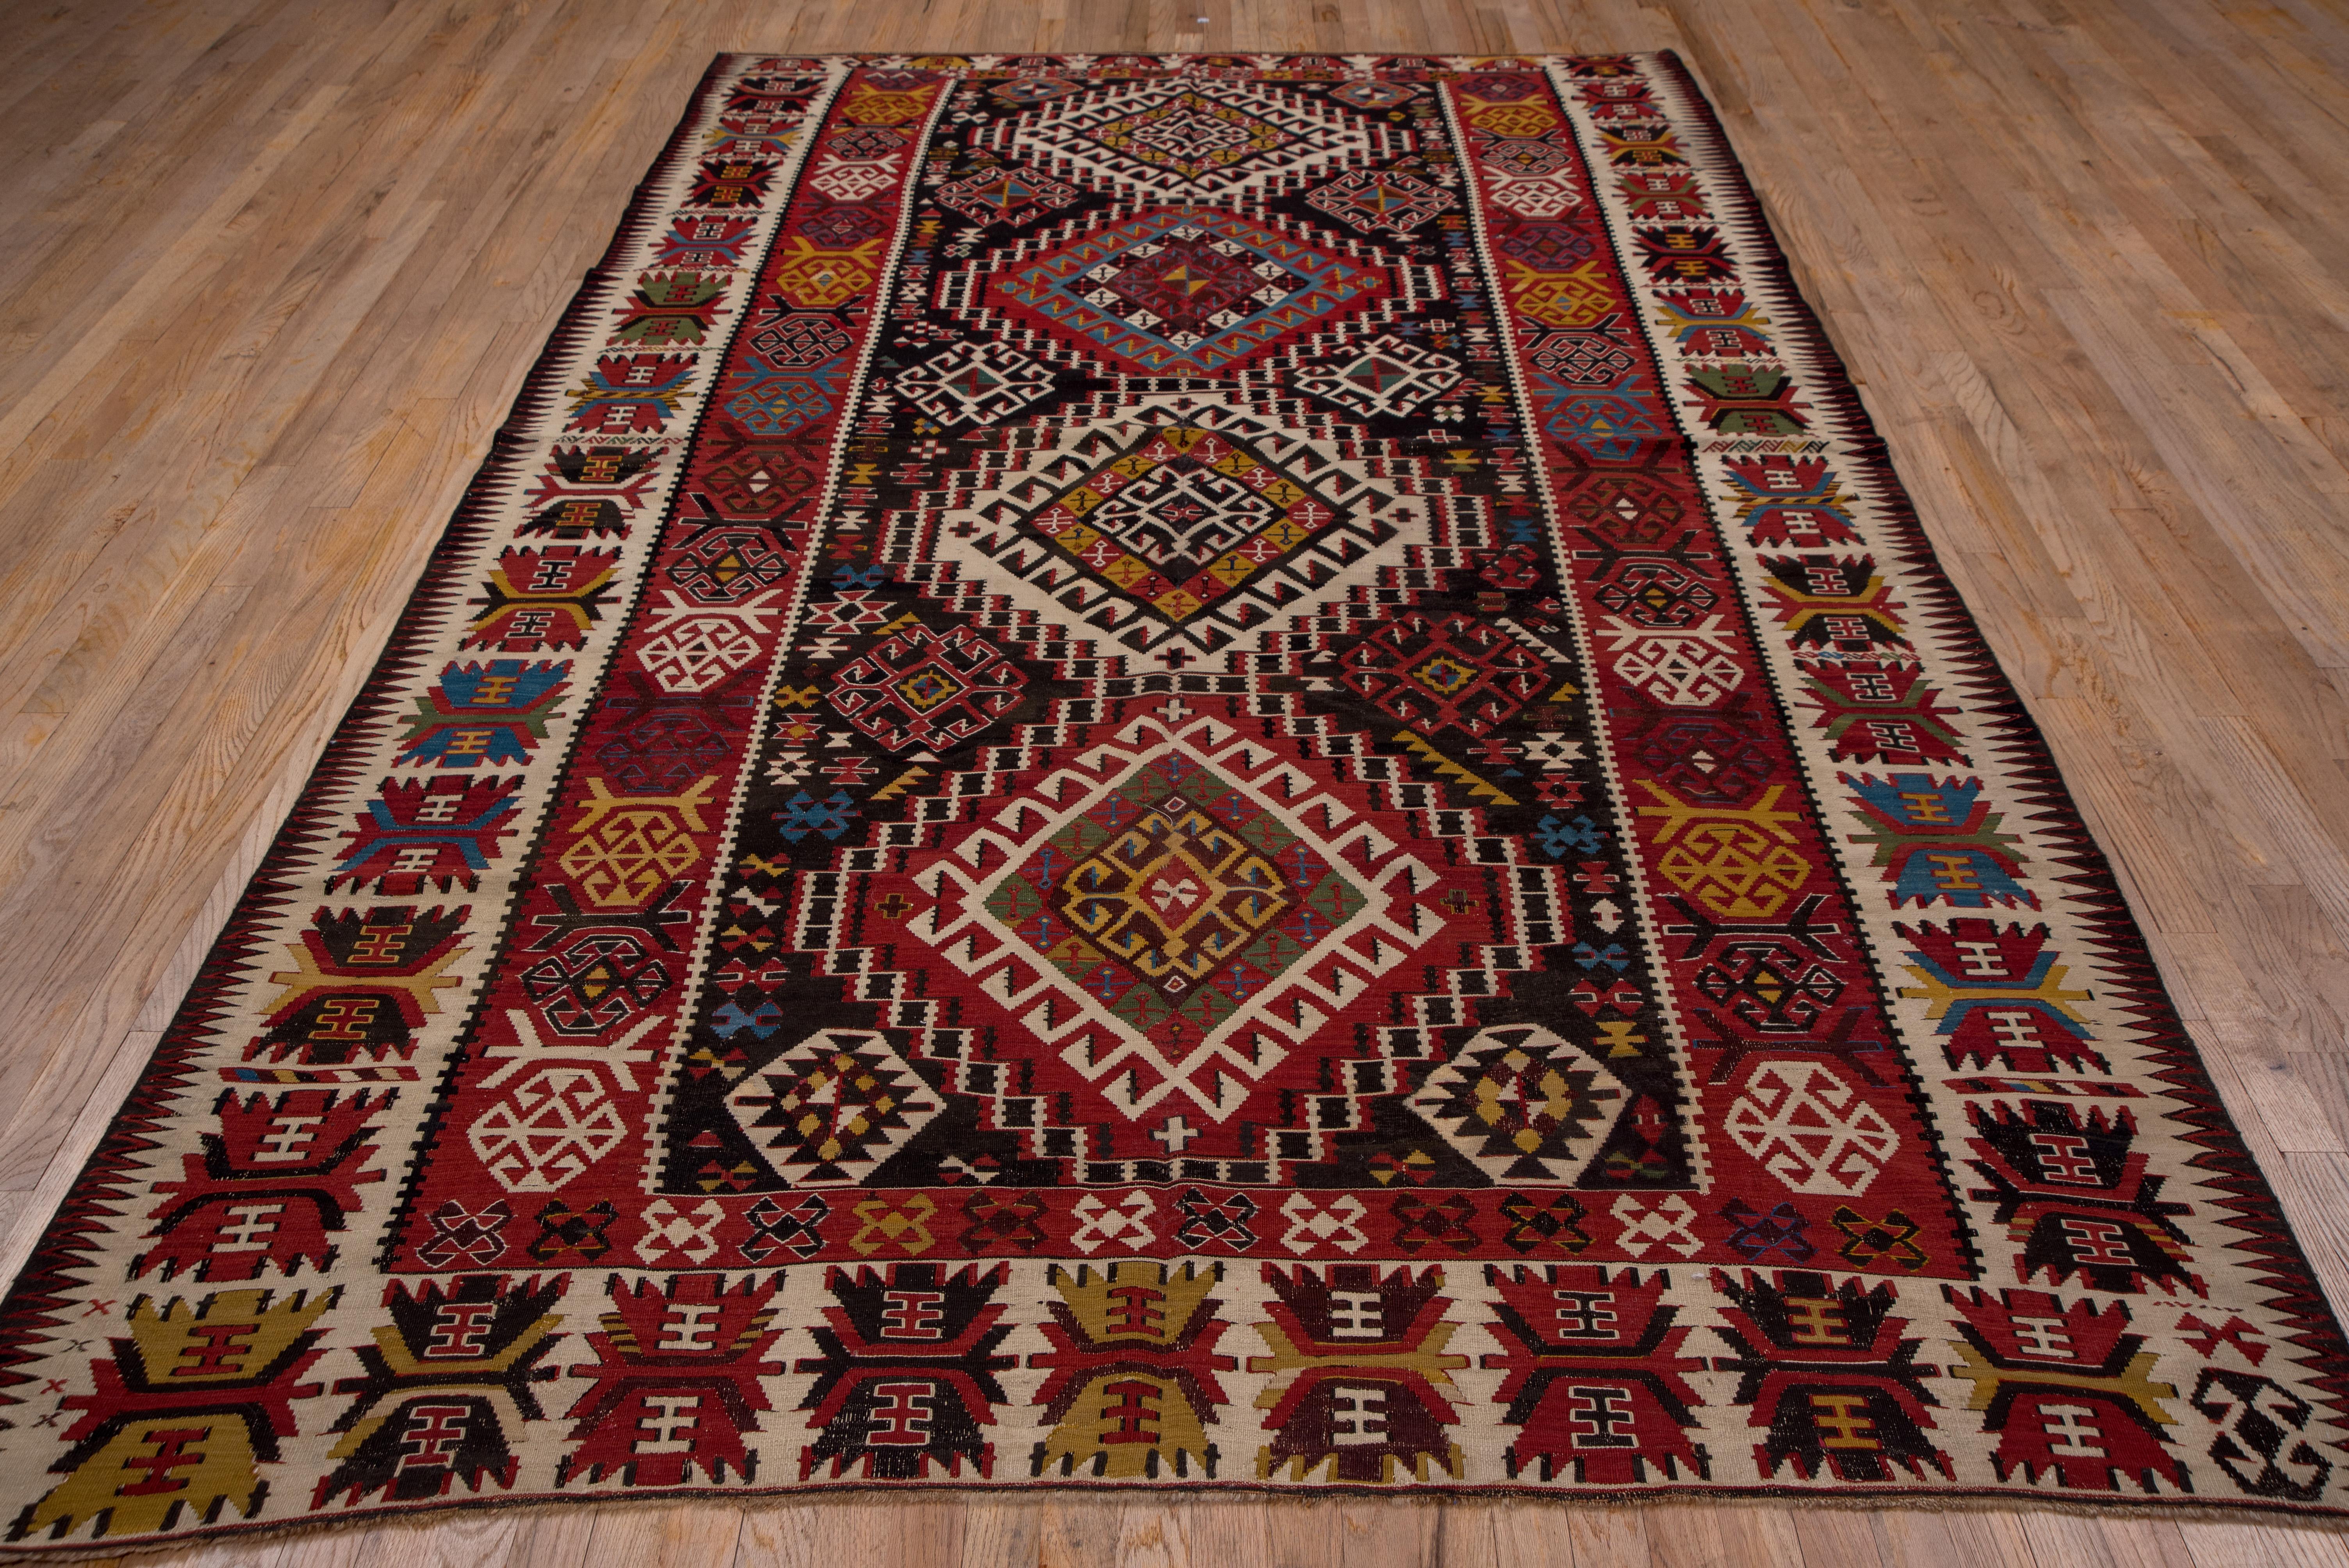 1920s Colorful Turkish Kilim Rug In Good Condition For Sale In New York, NY